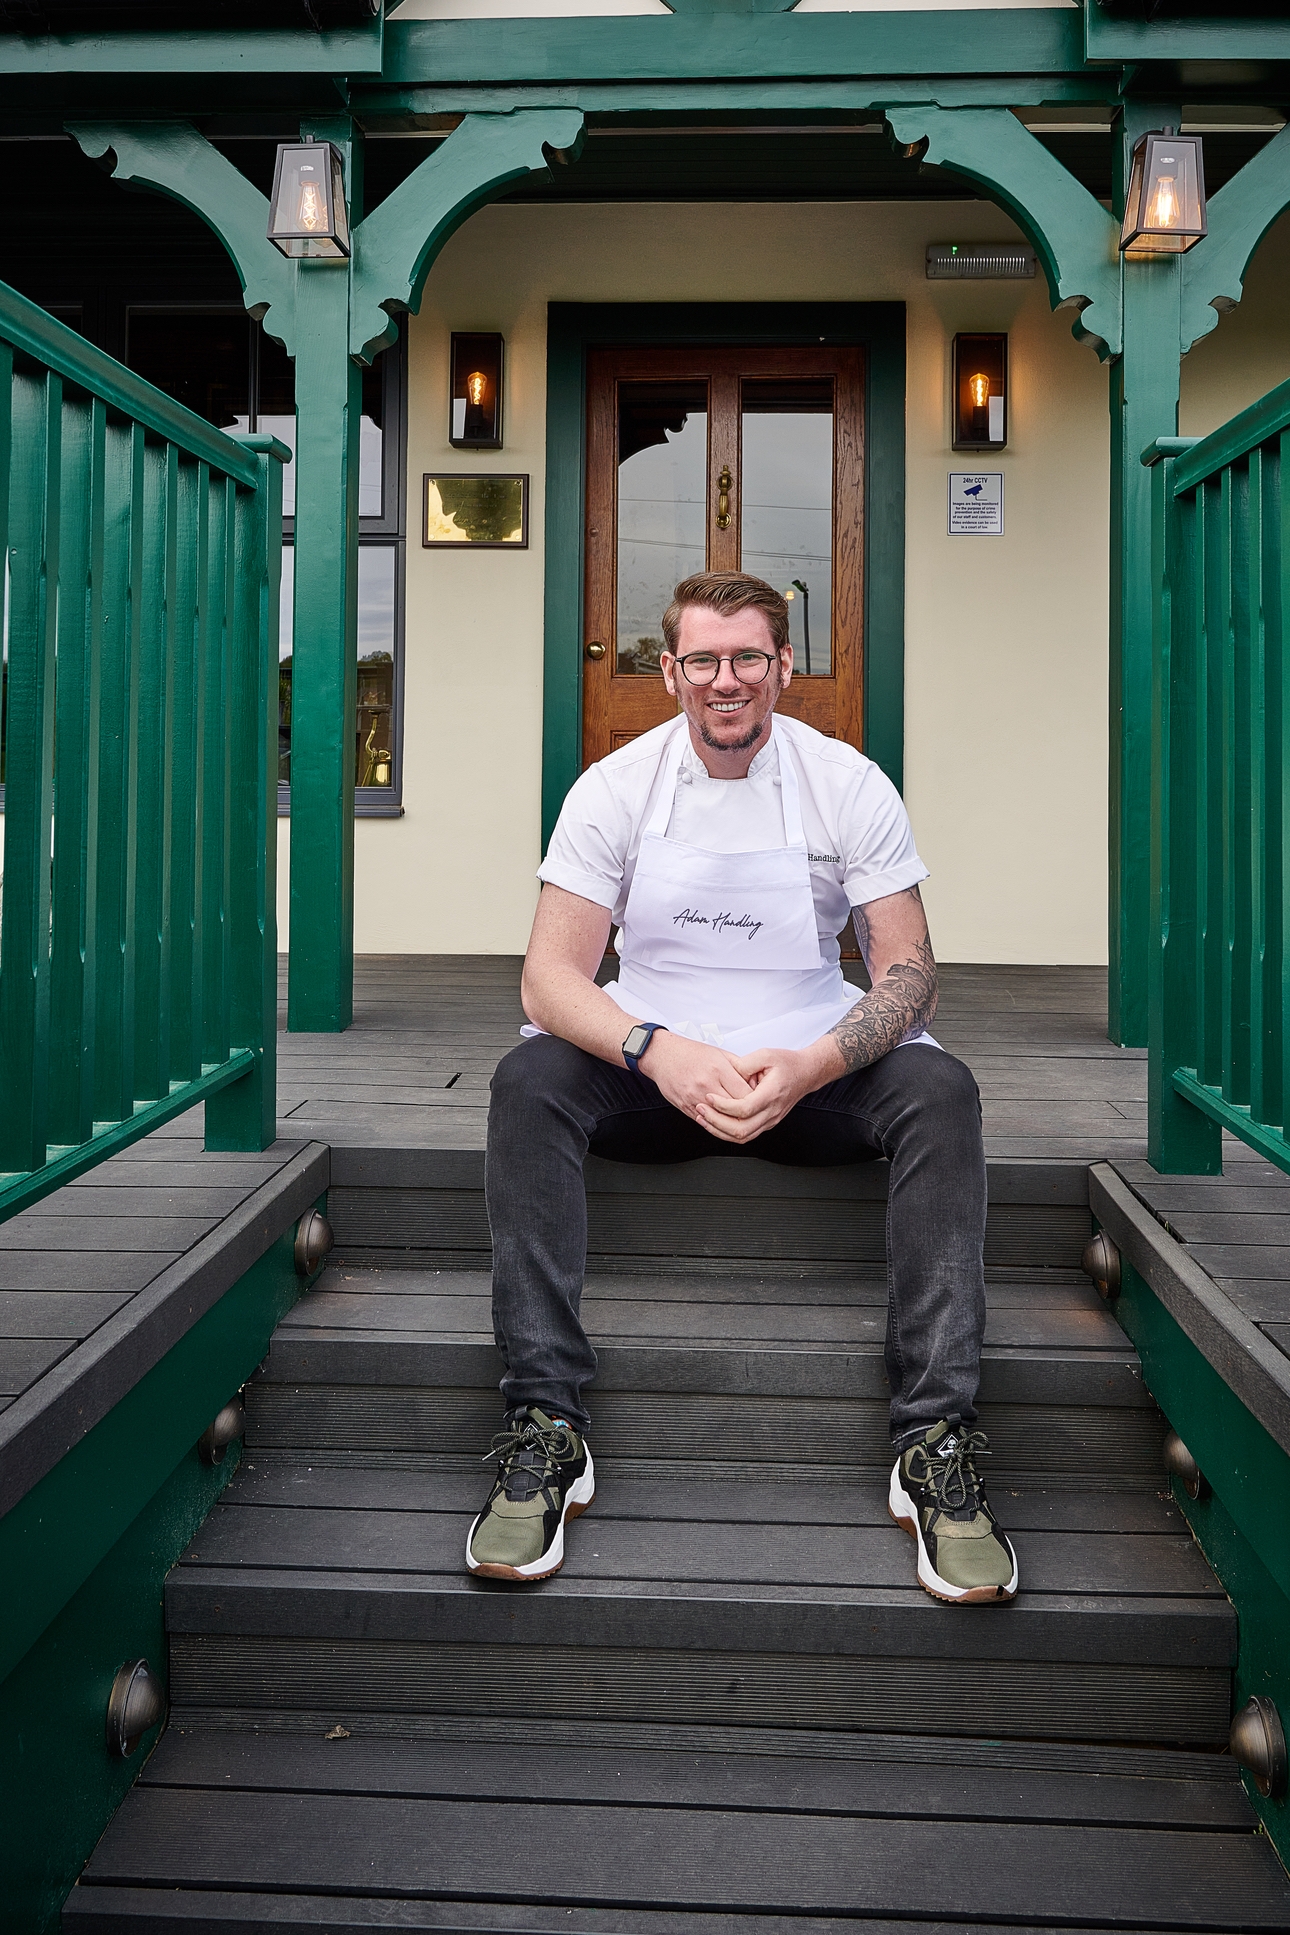 Chef Adam Handling who was declared a champion on cooking show